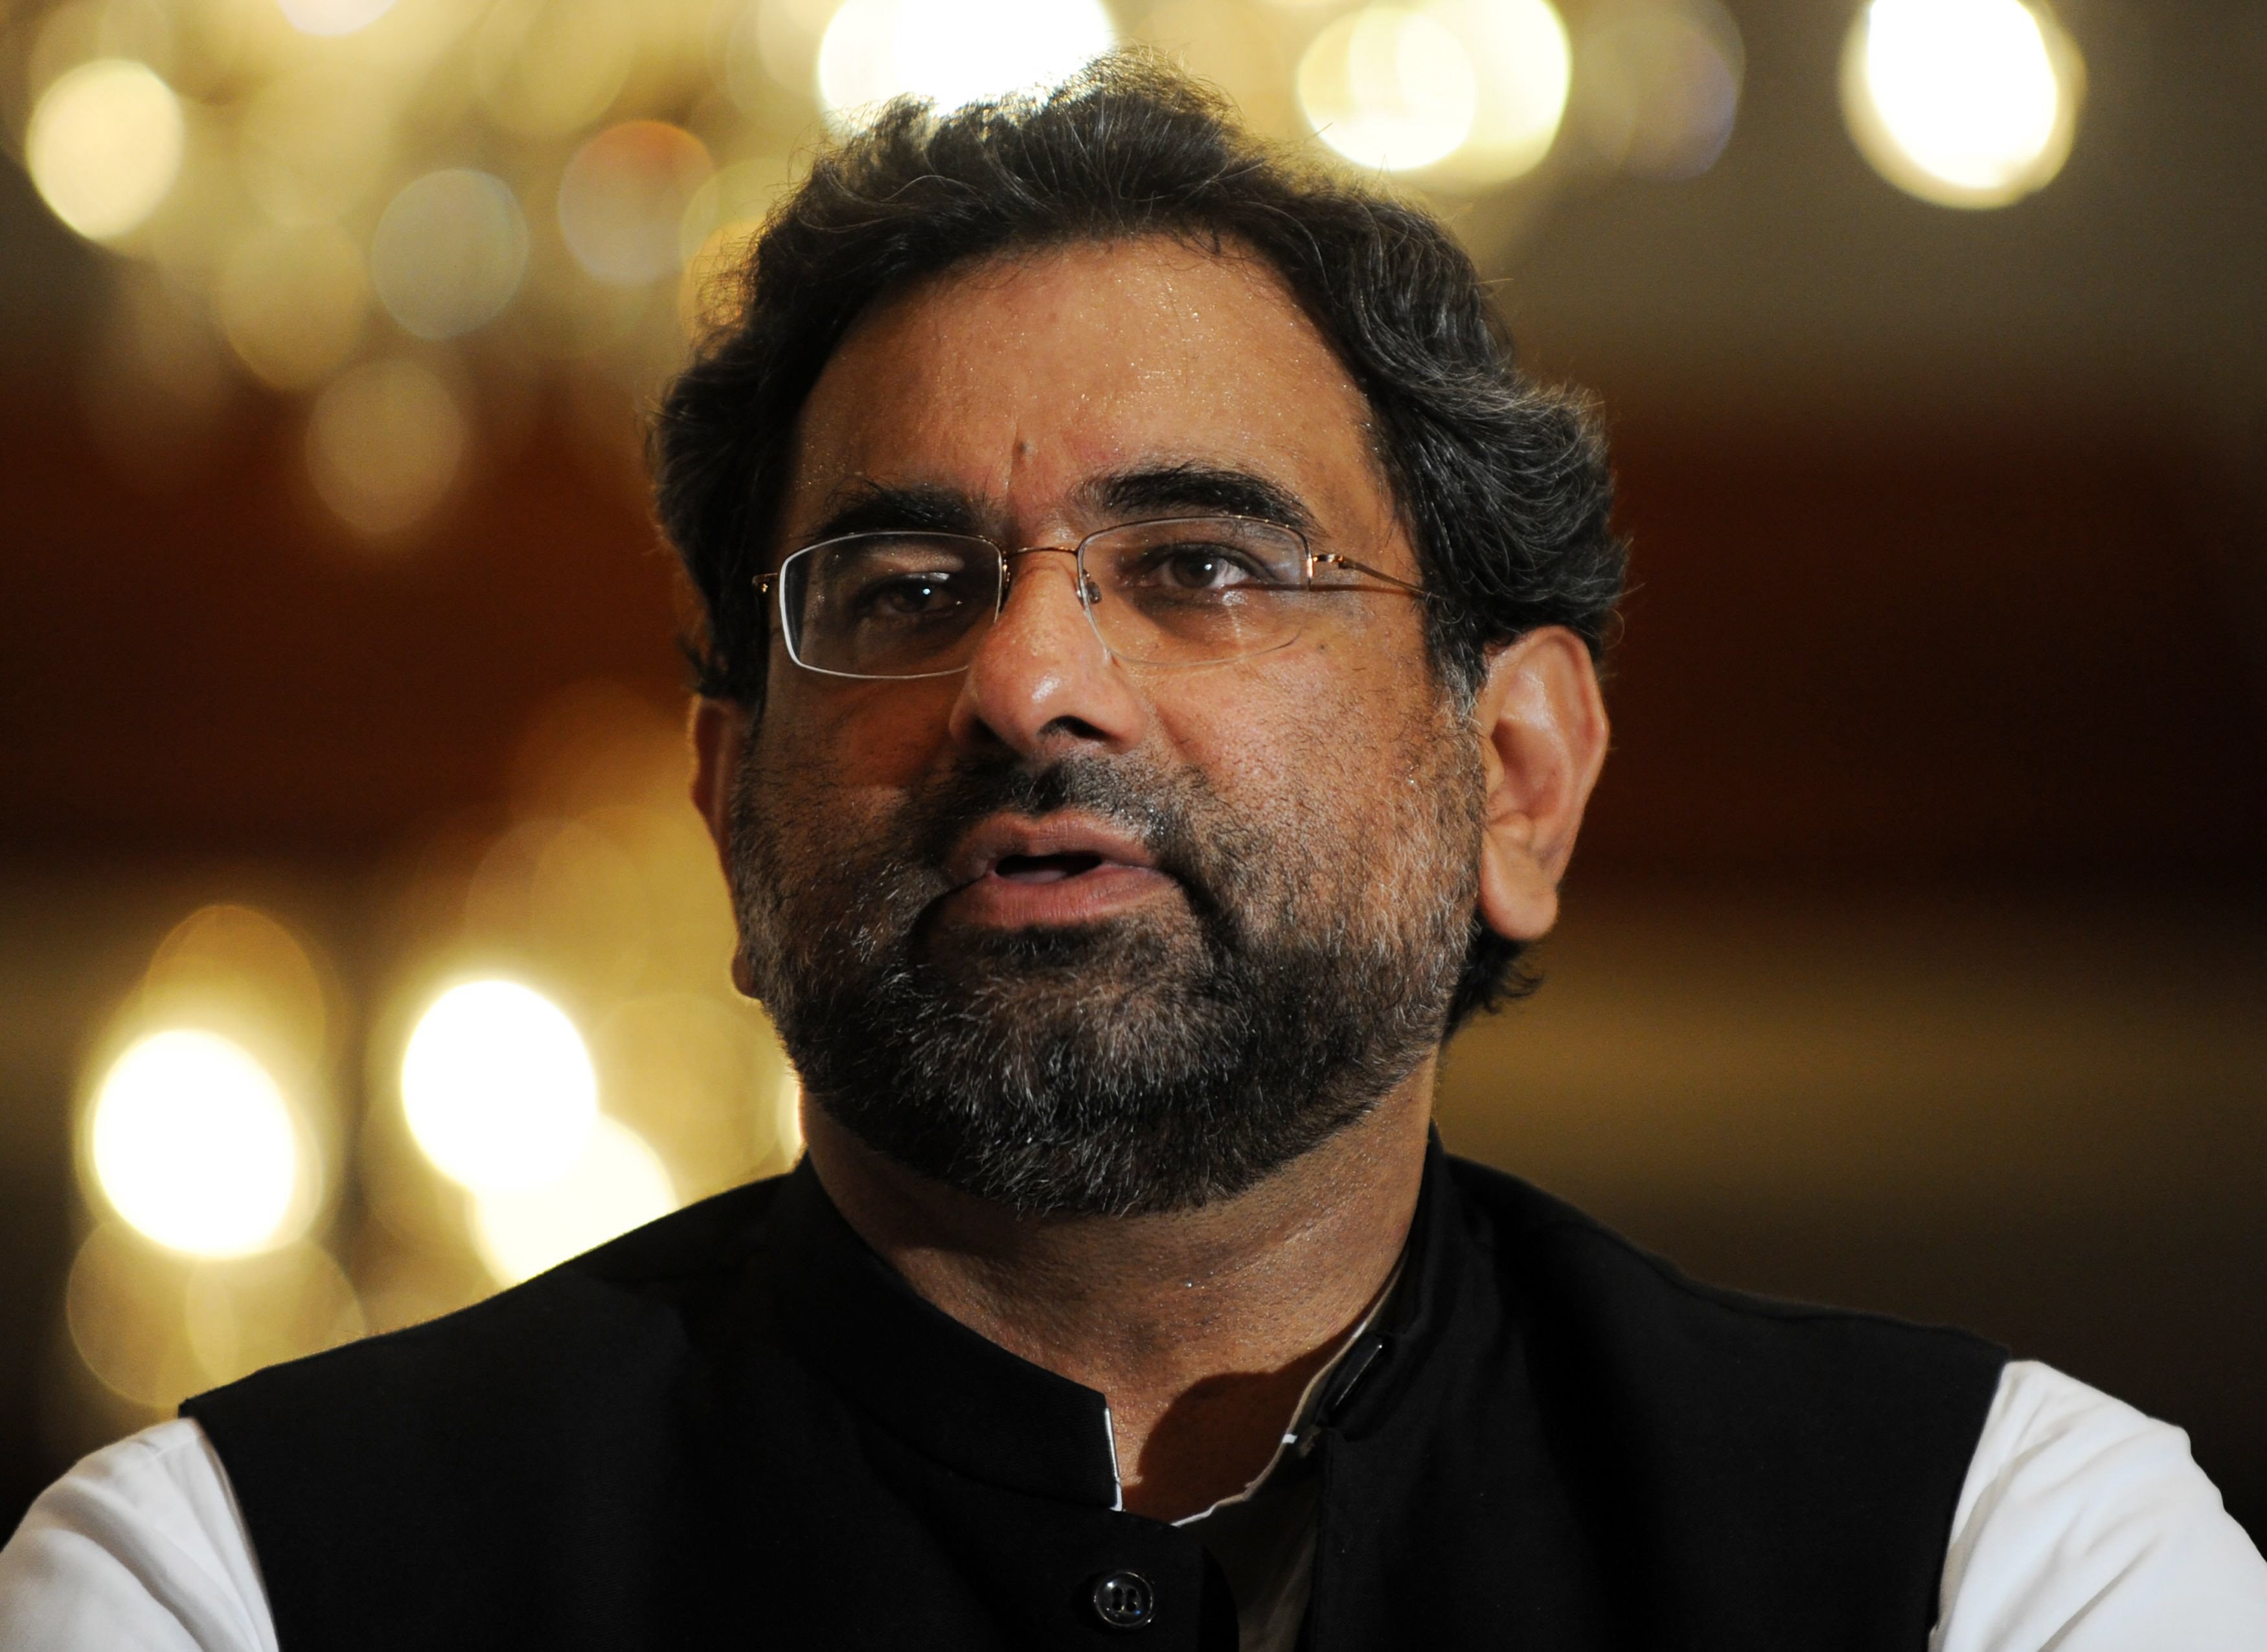 pml n leader shahid khaqan abbasi opposes extension of military courts photo file